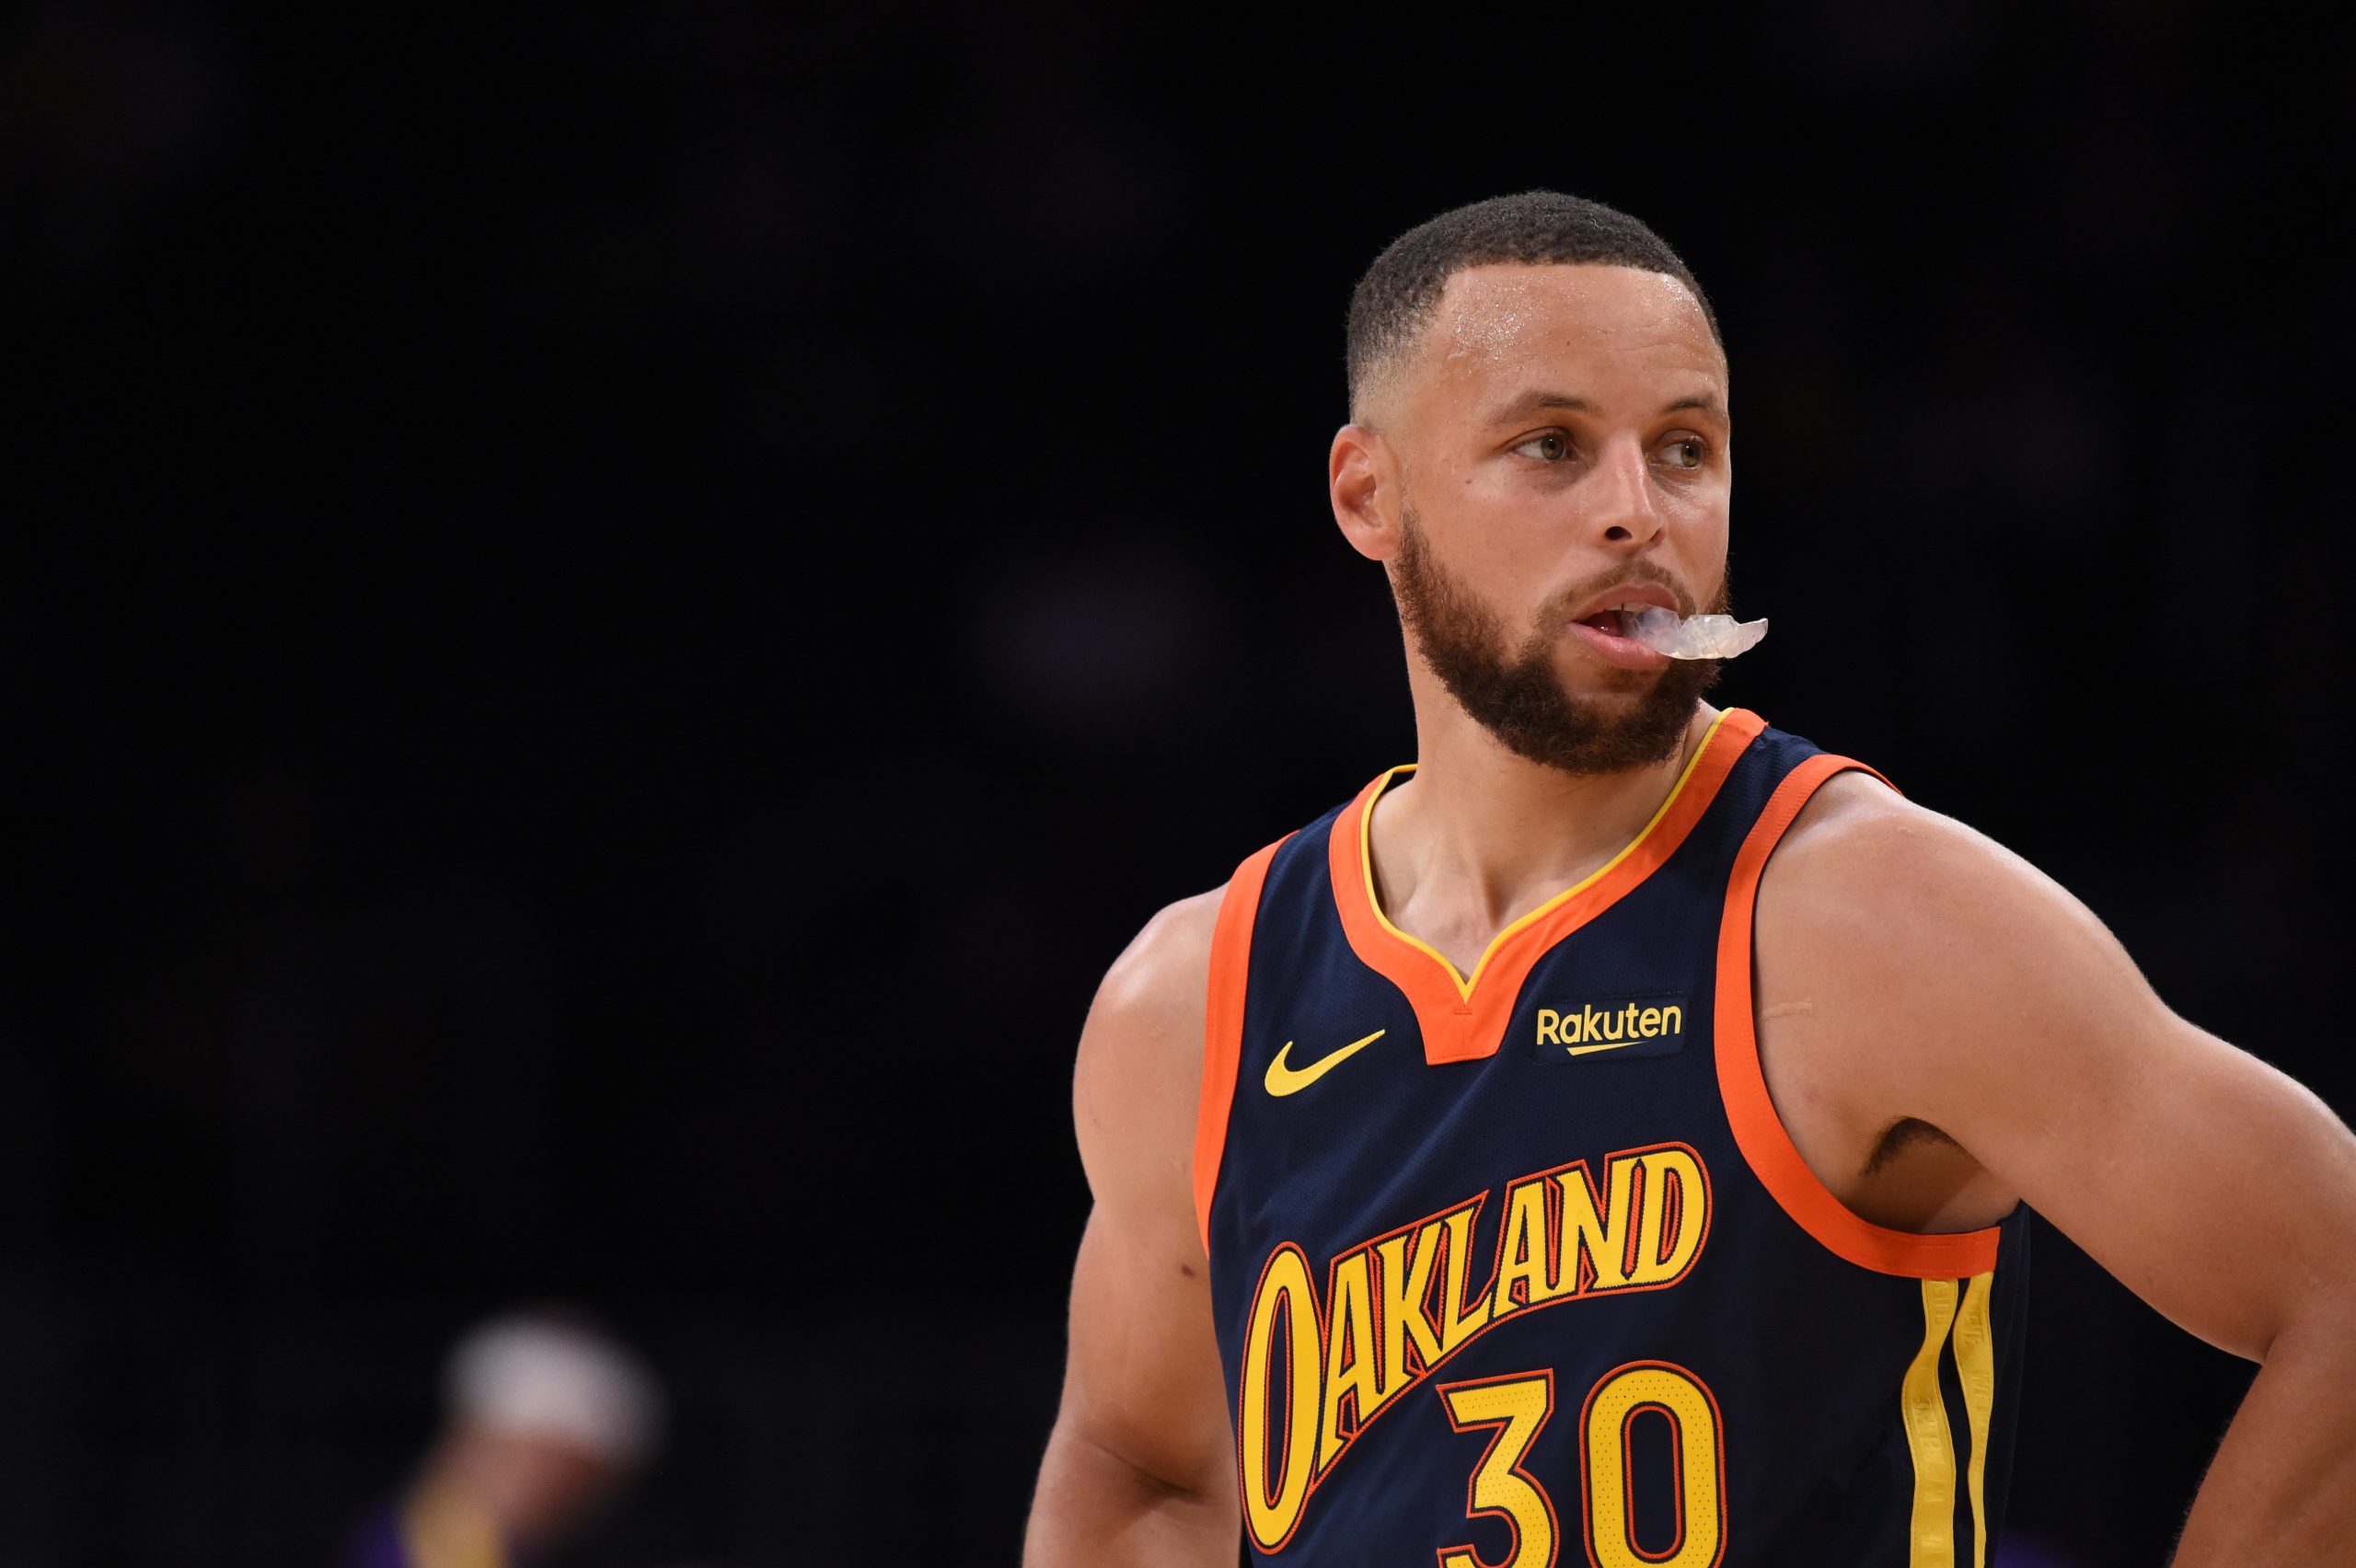 Report: Warriors sign Steph Curry to 4-year, $215M extension